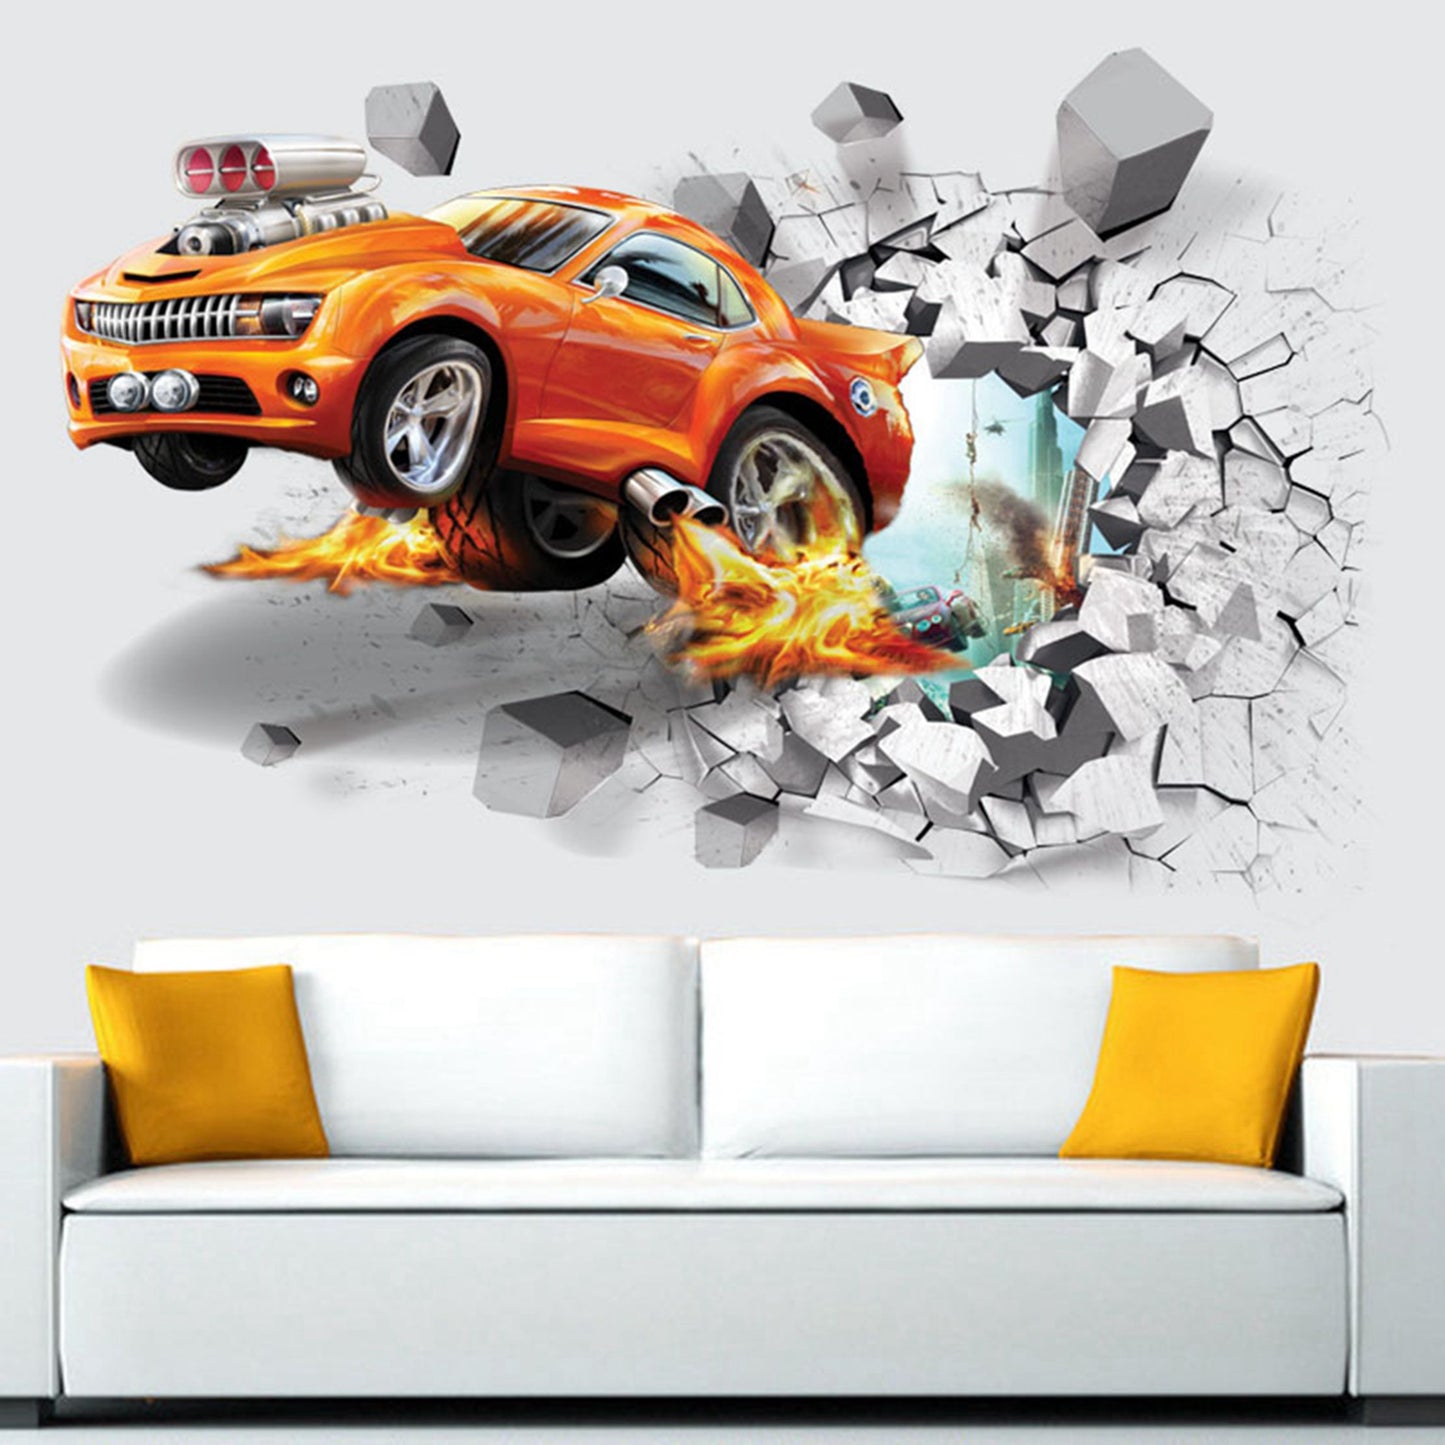 U-SHARK® Self-Adhesive Removable 3D Racing Car Wall Decals Football Wall Stickers Basketball Wall Decor Sports Decals Wall Murals Soccer Wallpapers Décor Poster as Nursery Christmas Birthday Gift